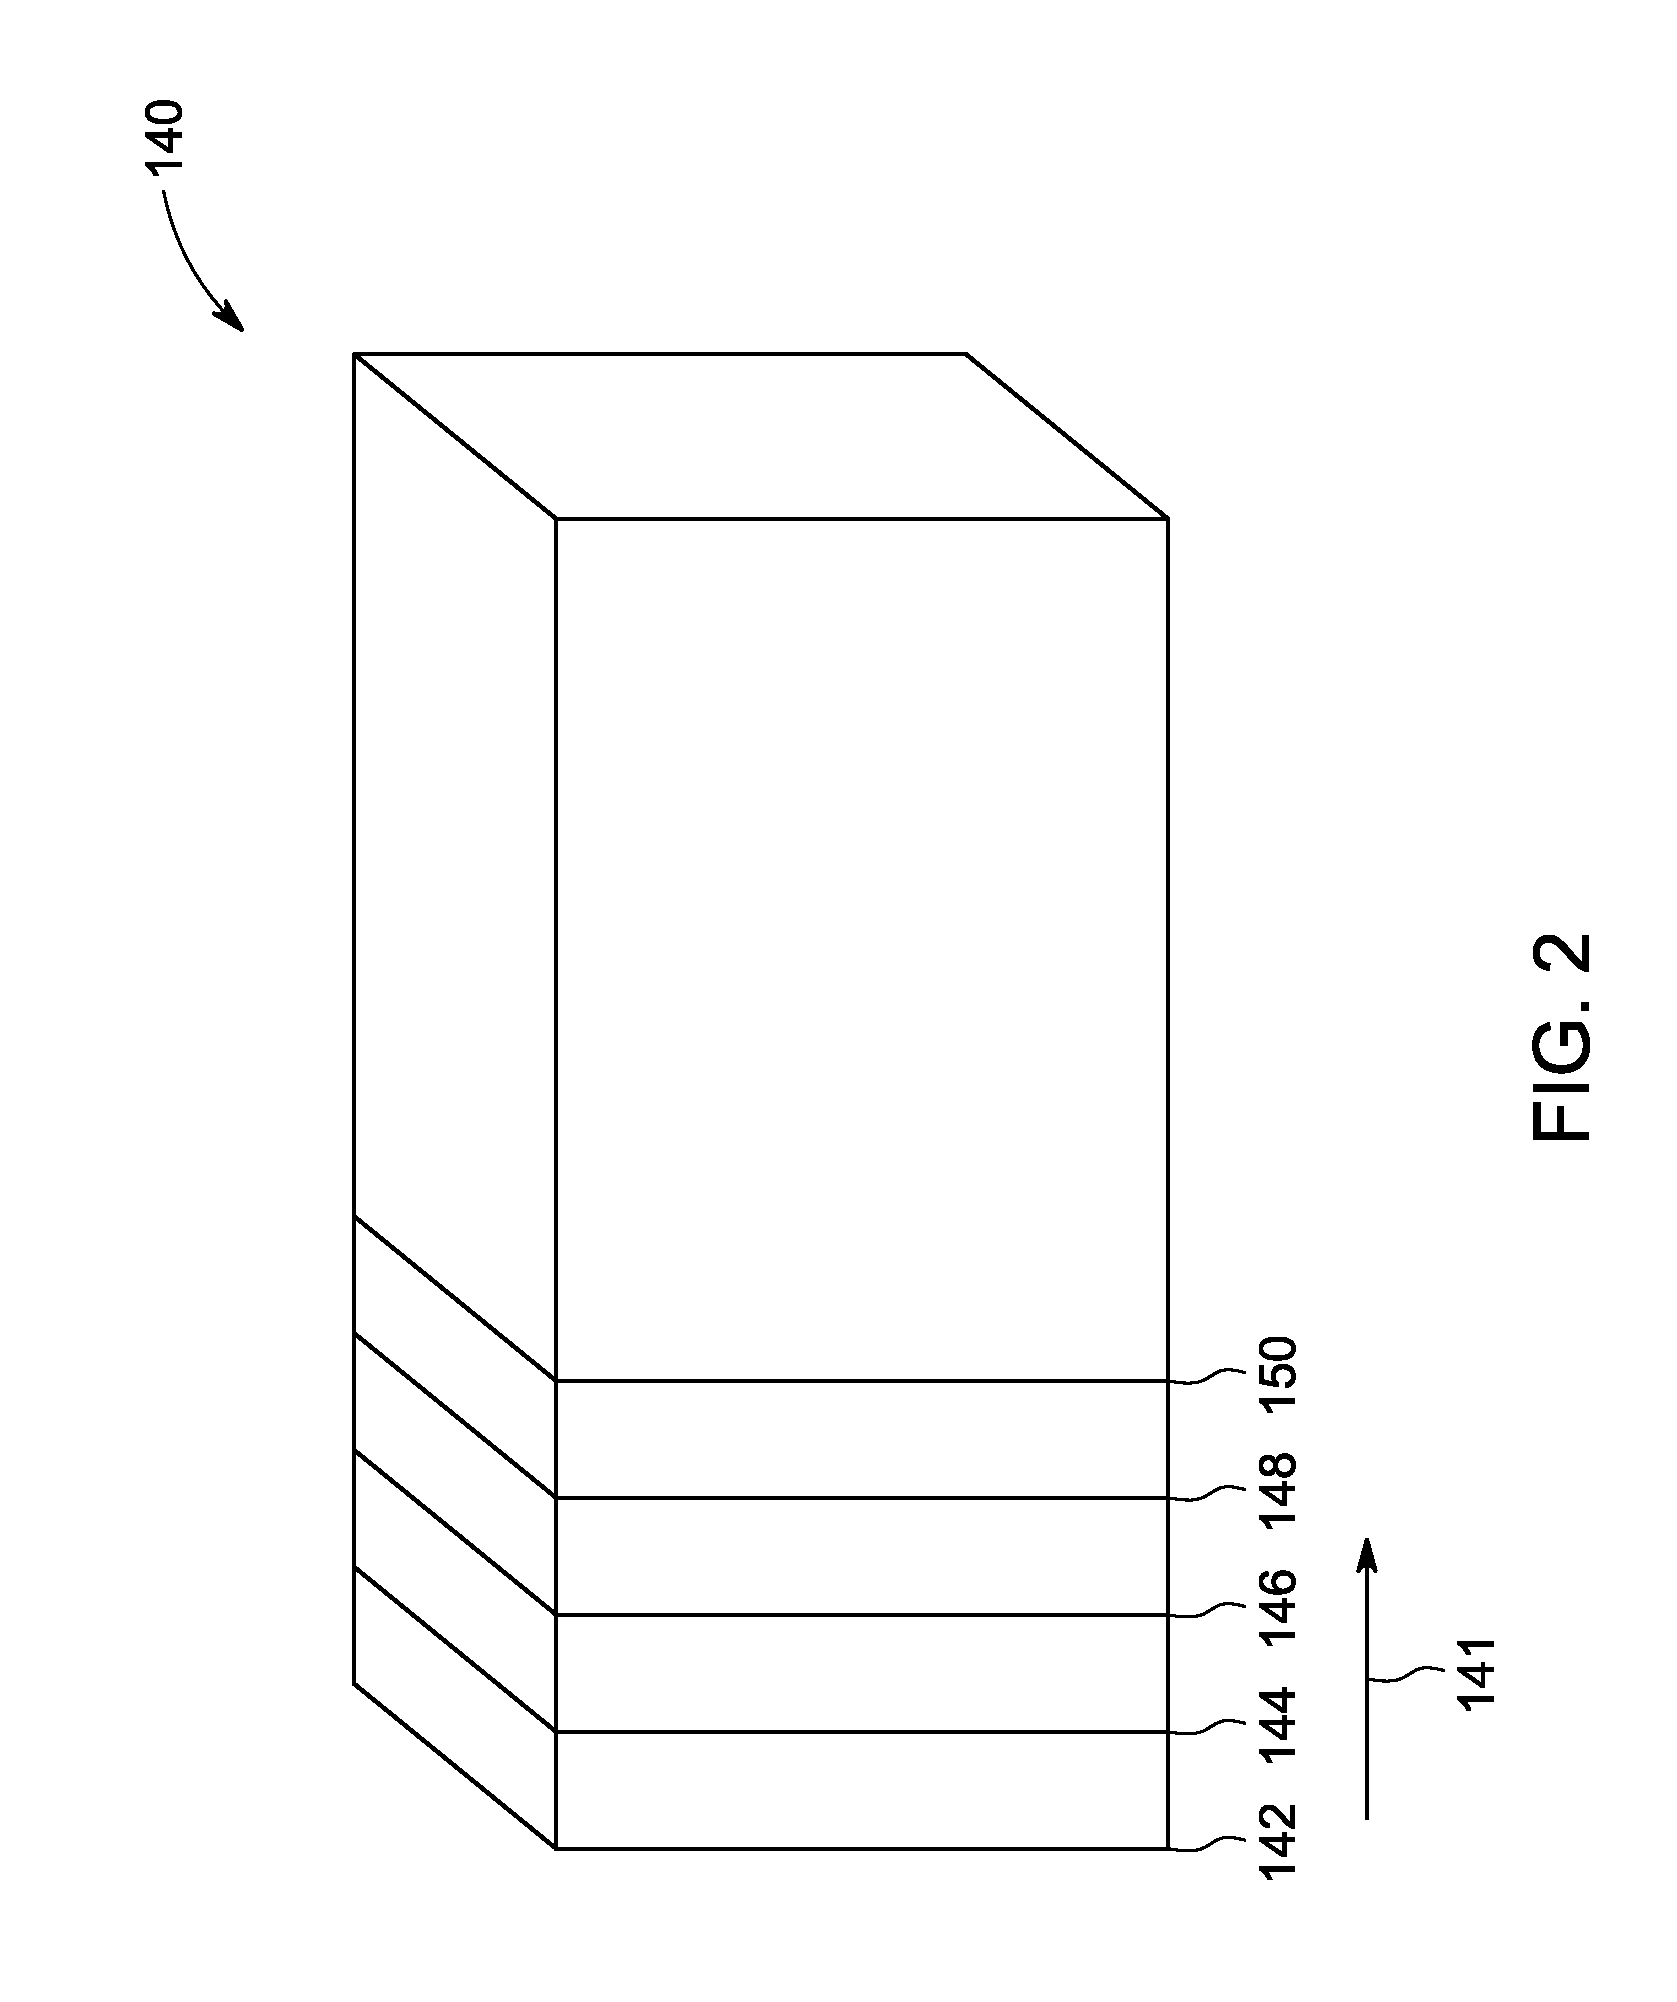 Ultrasound imaging system and method for drift compensation